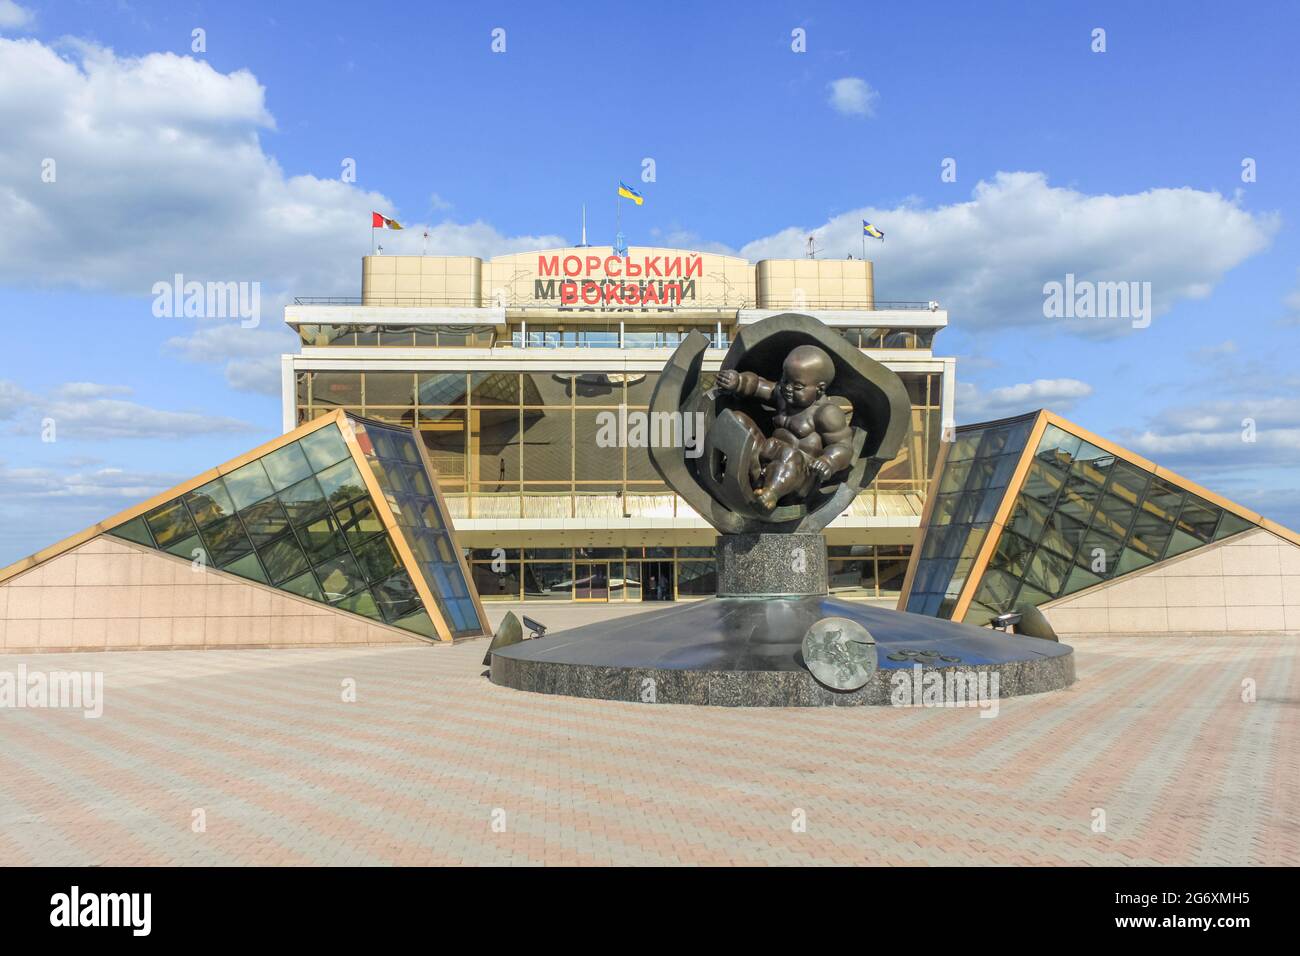 Odessa, Ukraine, October 9, 2012: The building of the sea station and the sculpture of the baby in the city of Odessa Stock Photo